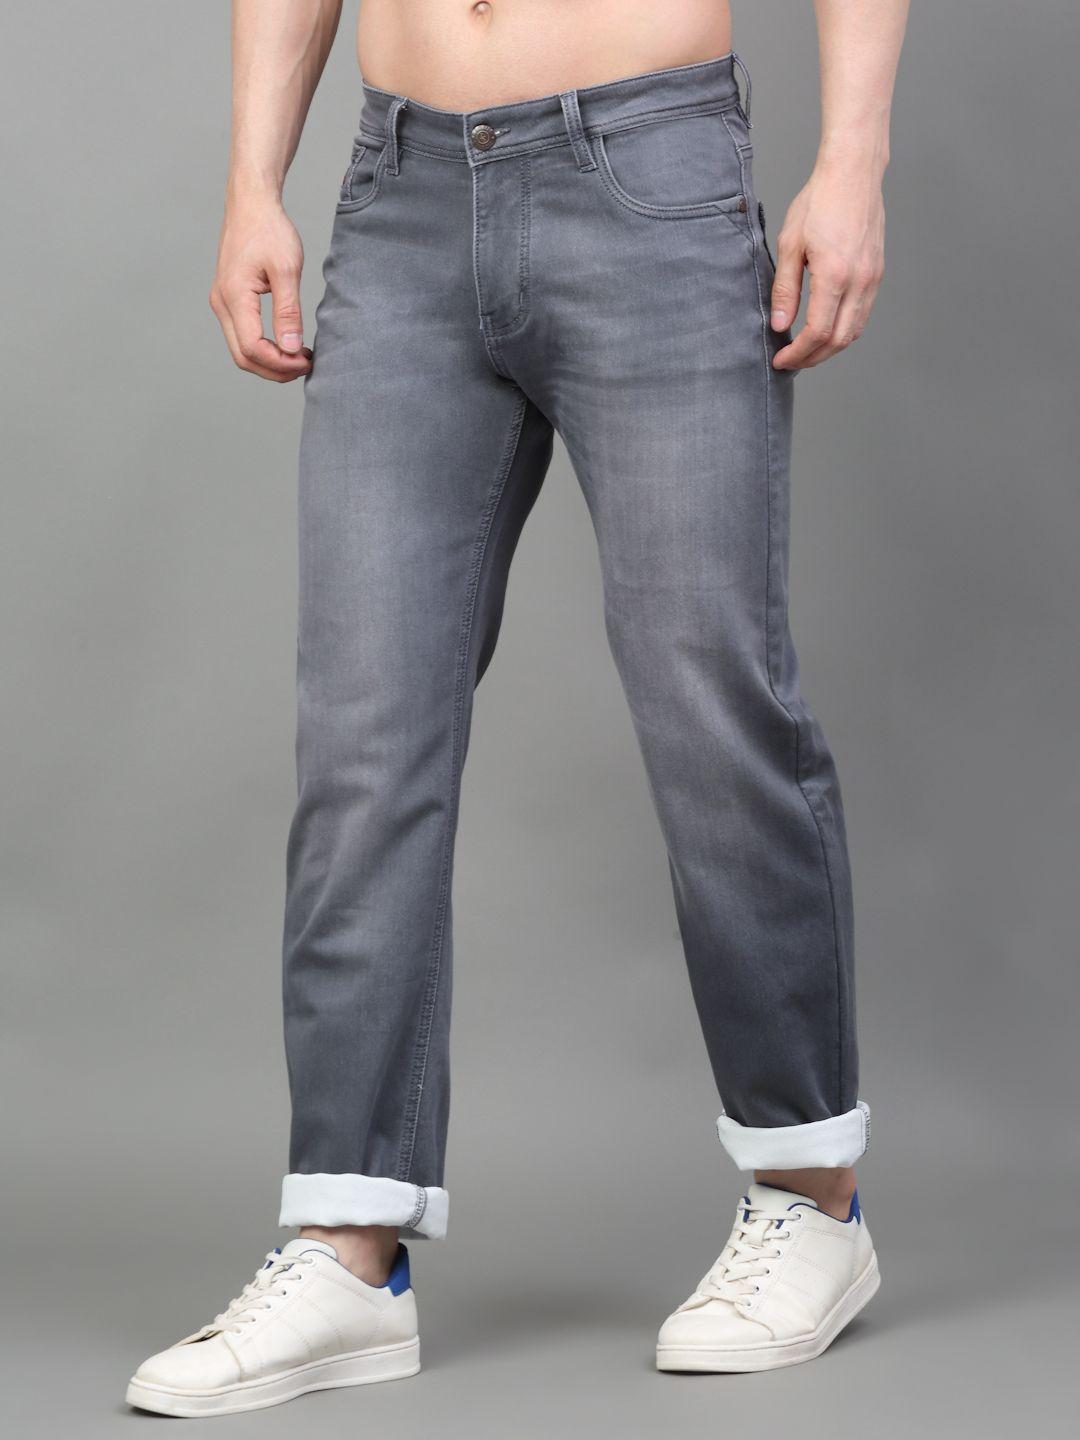 louis stitch men relaxed fit light fade stretchable jeans